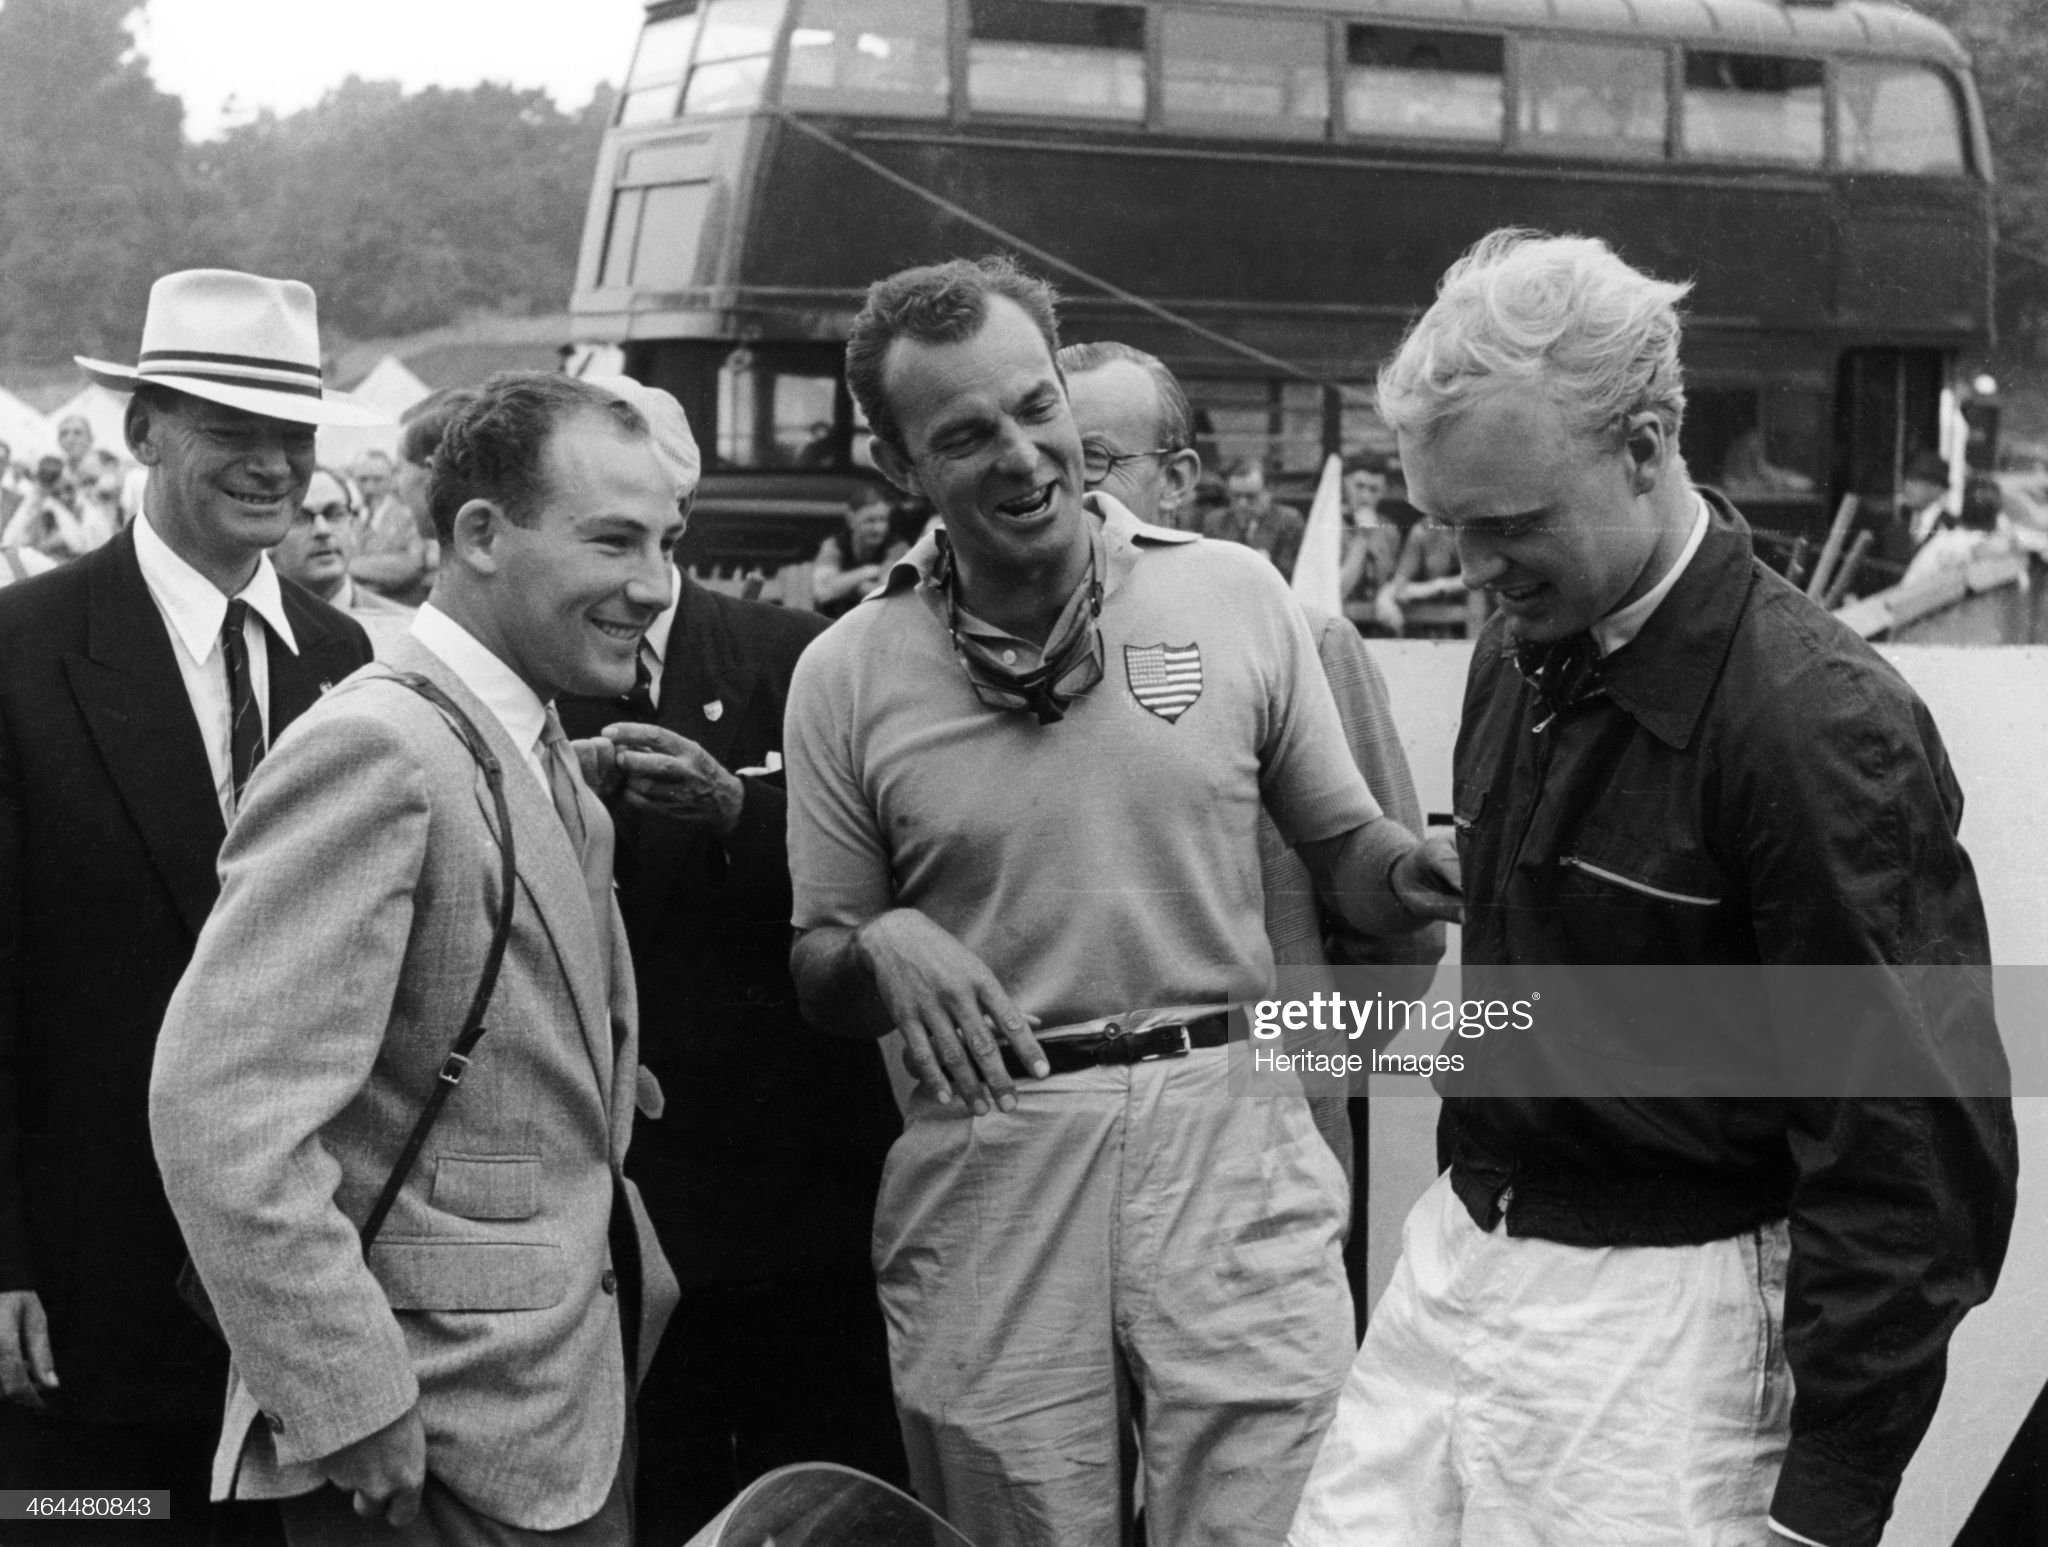 Stirling Moss with Harry Schell and Mike Hawthorn, Crystal Palace, July 1955. 